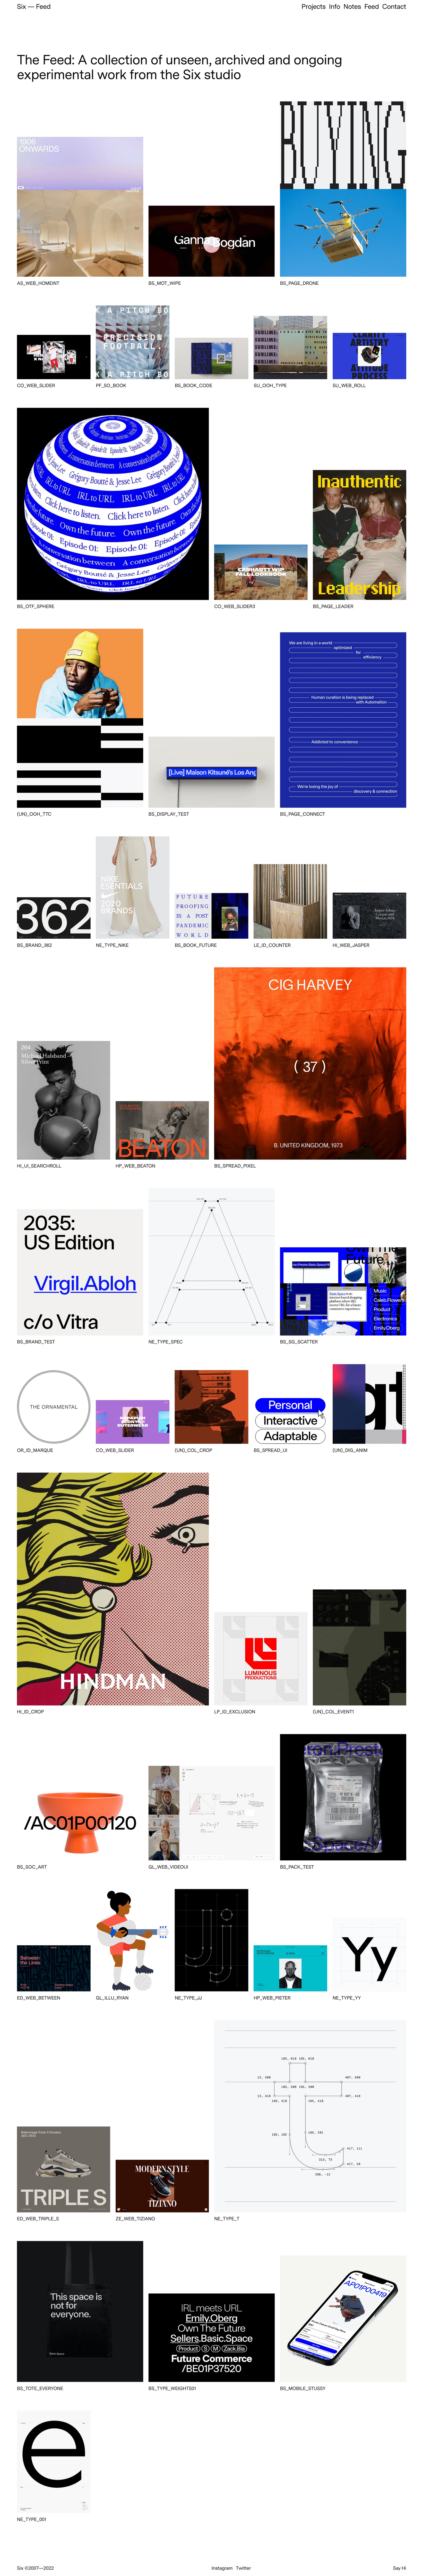 Six Landing Page Example: Six is an international creative agency working at the convergence of brand, digital and art direction.